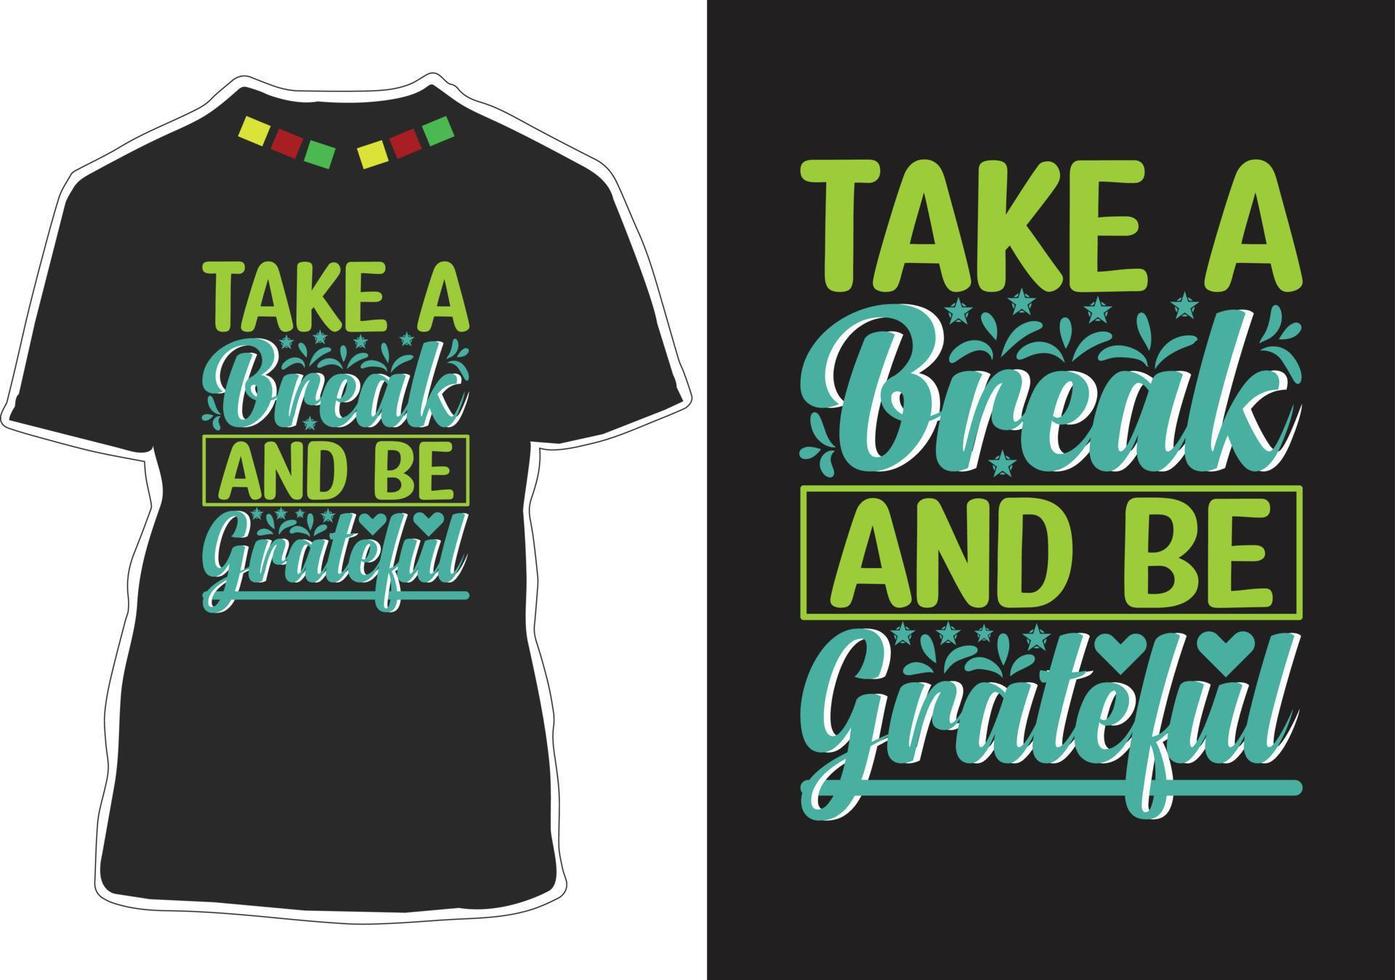 Take a break and be grateful Motivational quotes t-shirt design vector